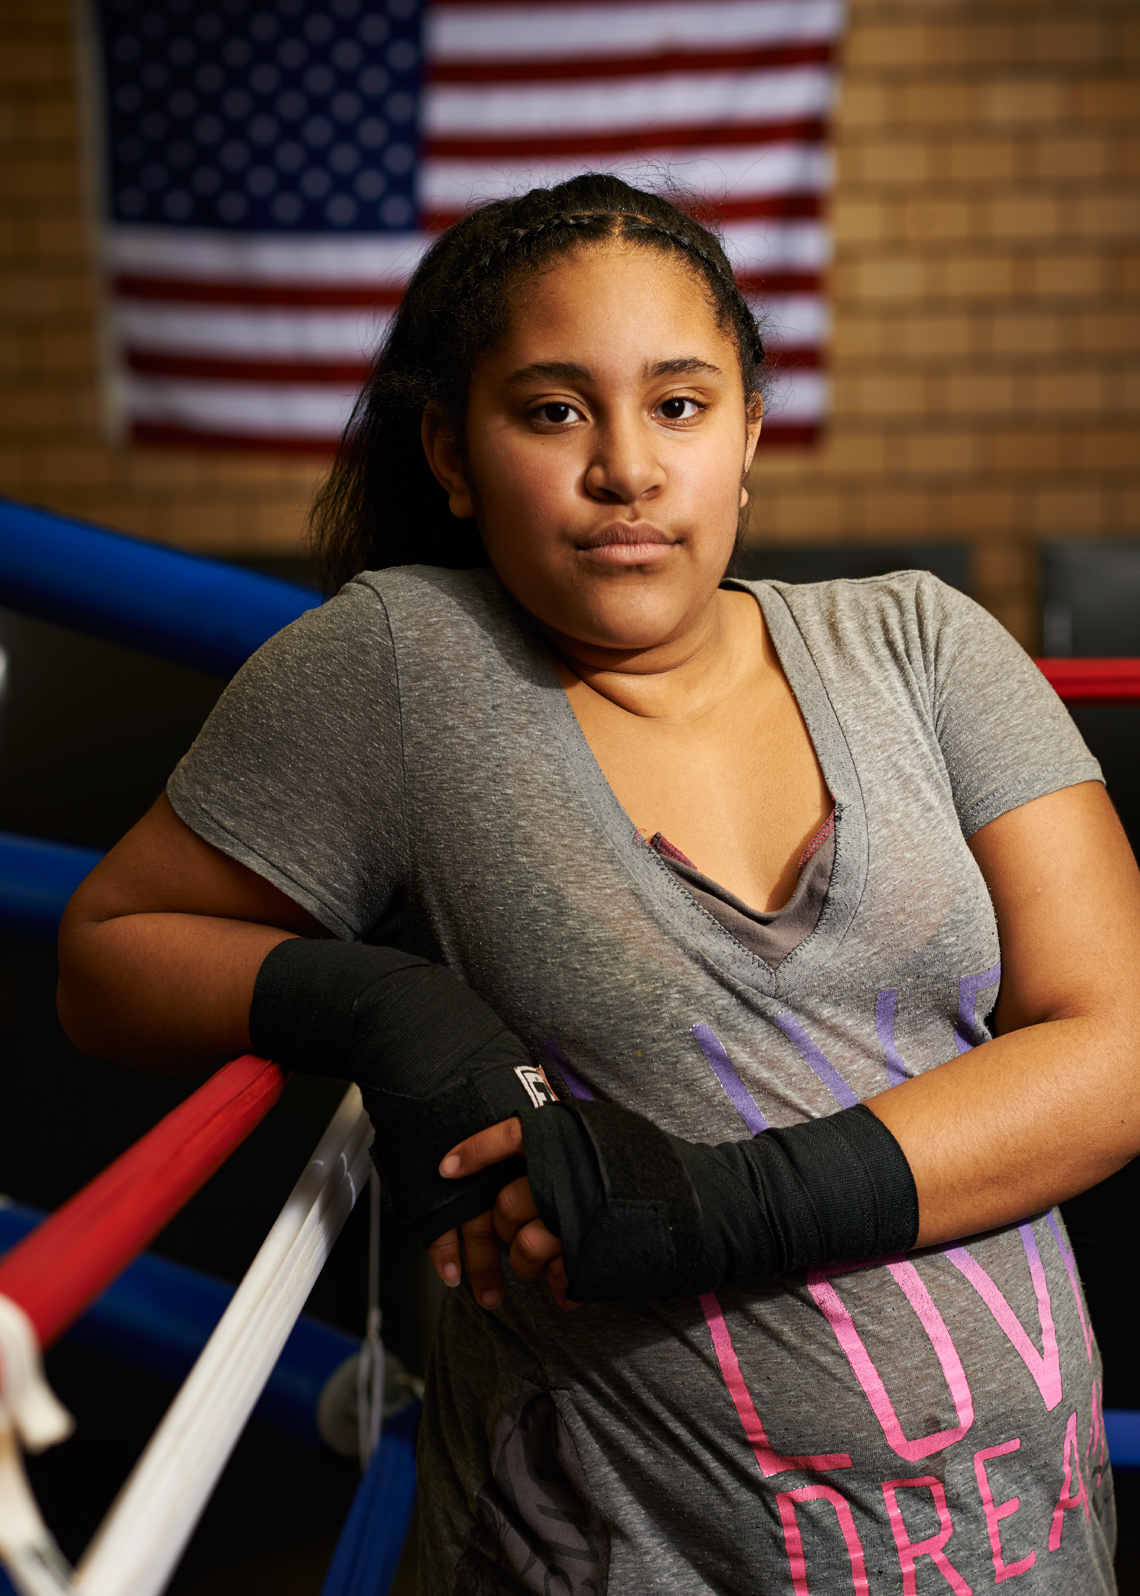 Sassy Teen Woman in Boxing Ring